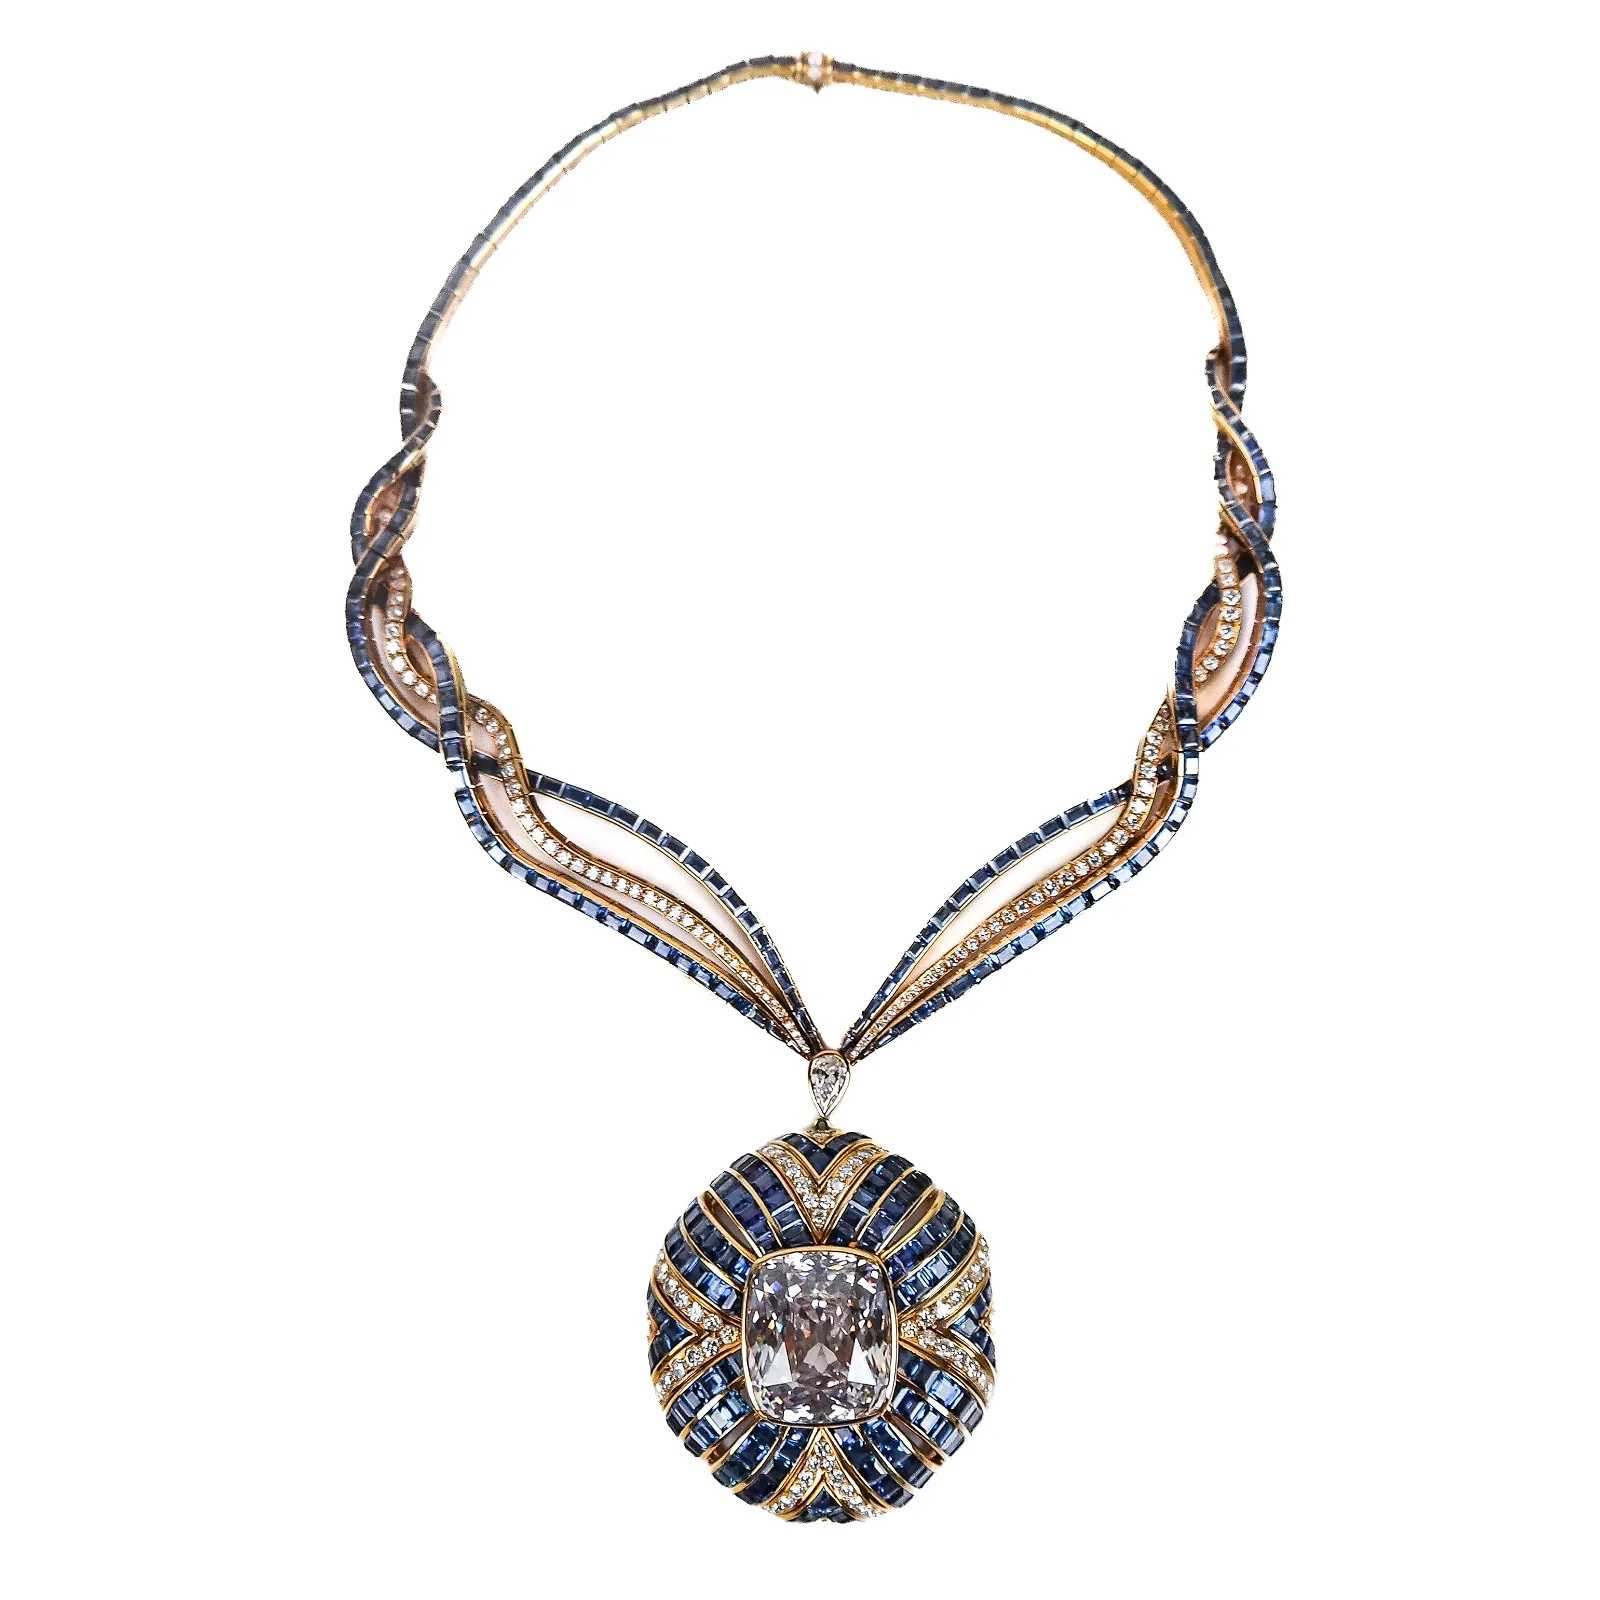 Jacques Timey for Harry Winston Pendant Necklace, estimated at $30,000-$40,000 at Roland NY.